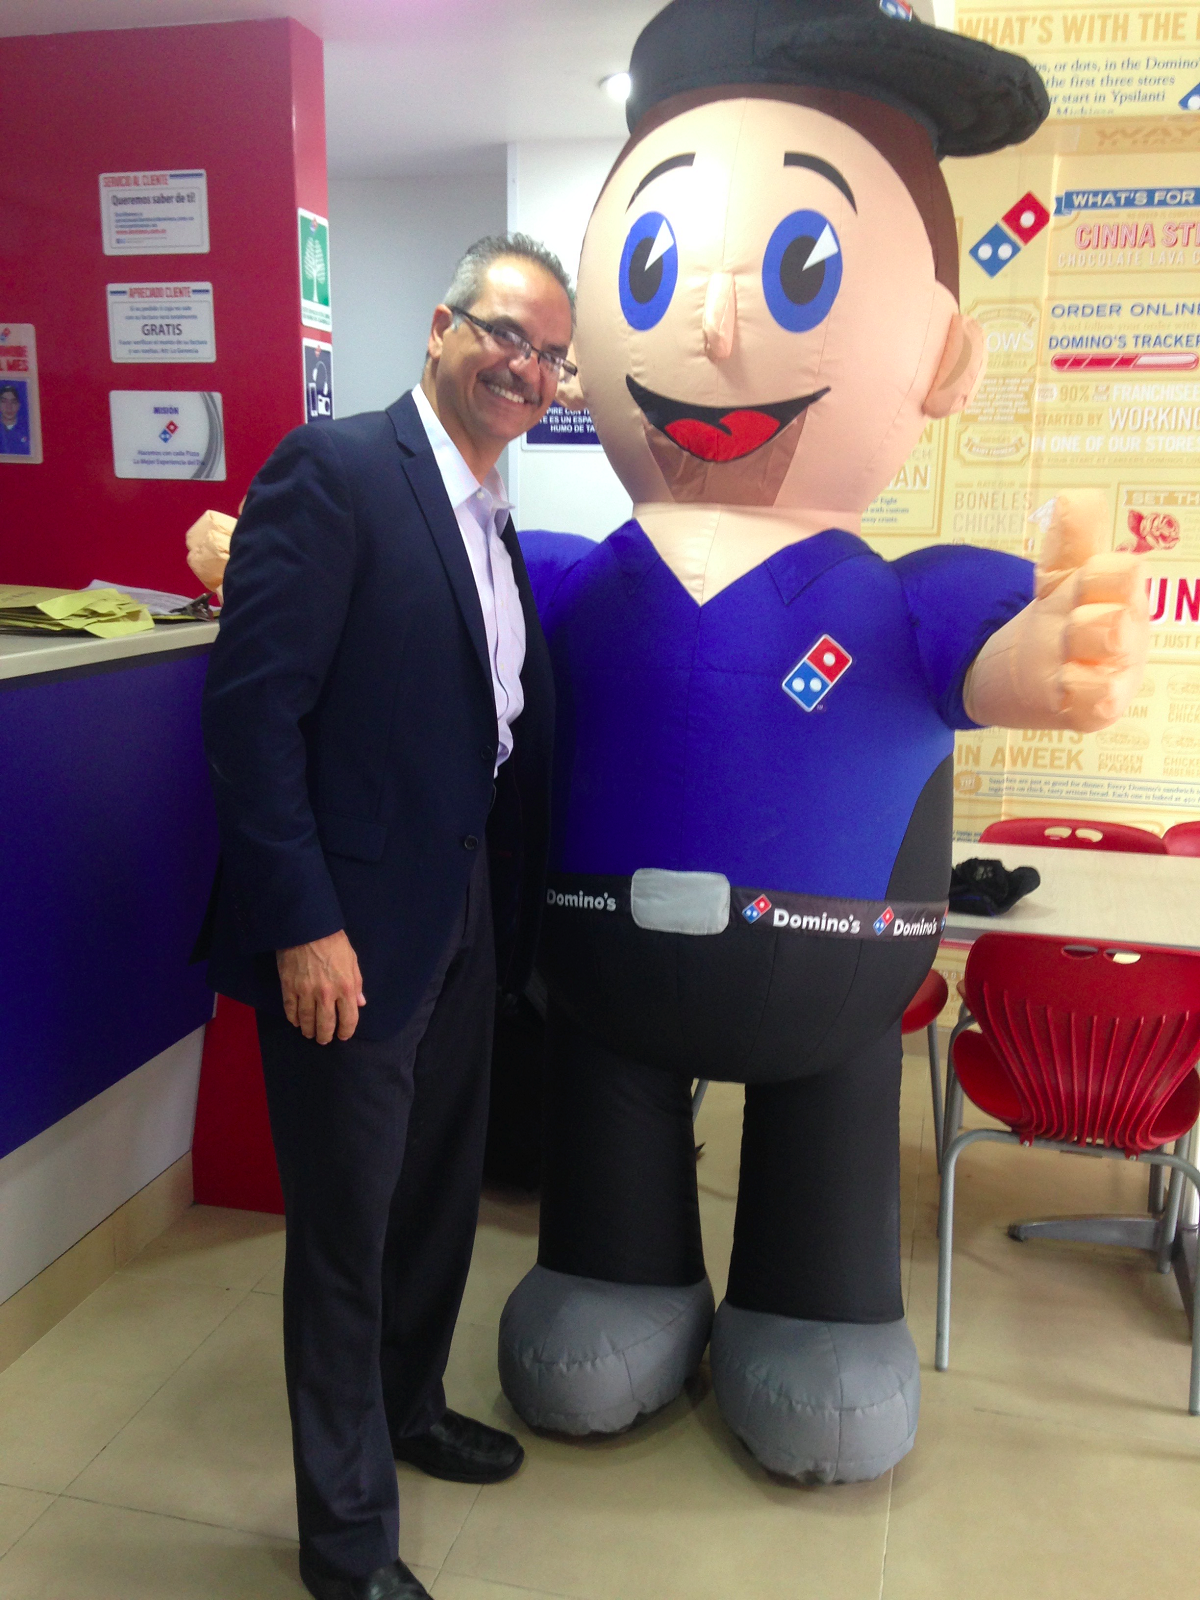 Guillermo Sadir - Former Director of Franchisee Operations and Development for Dominos